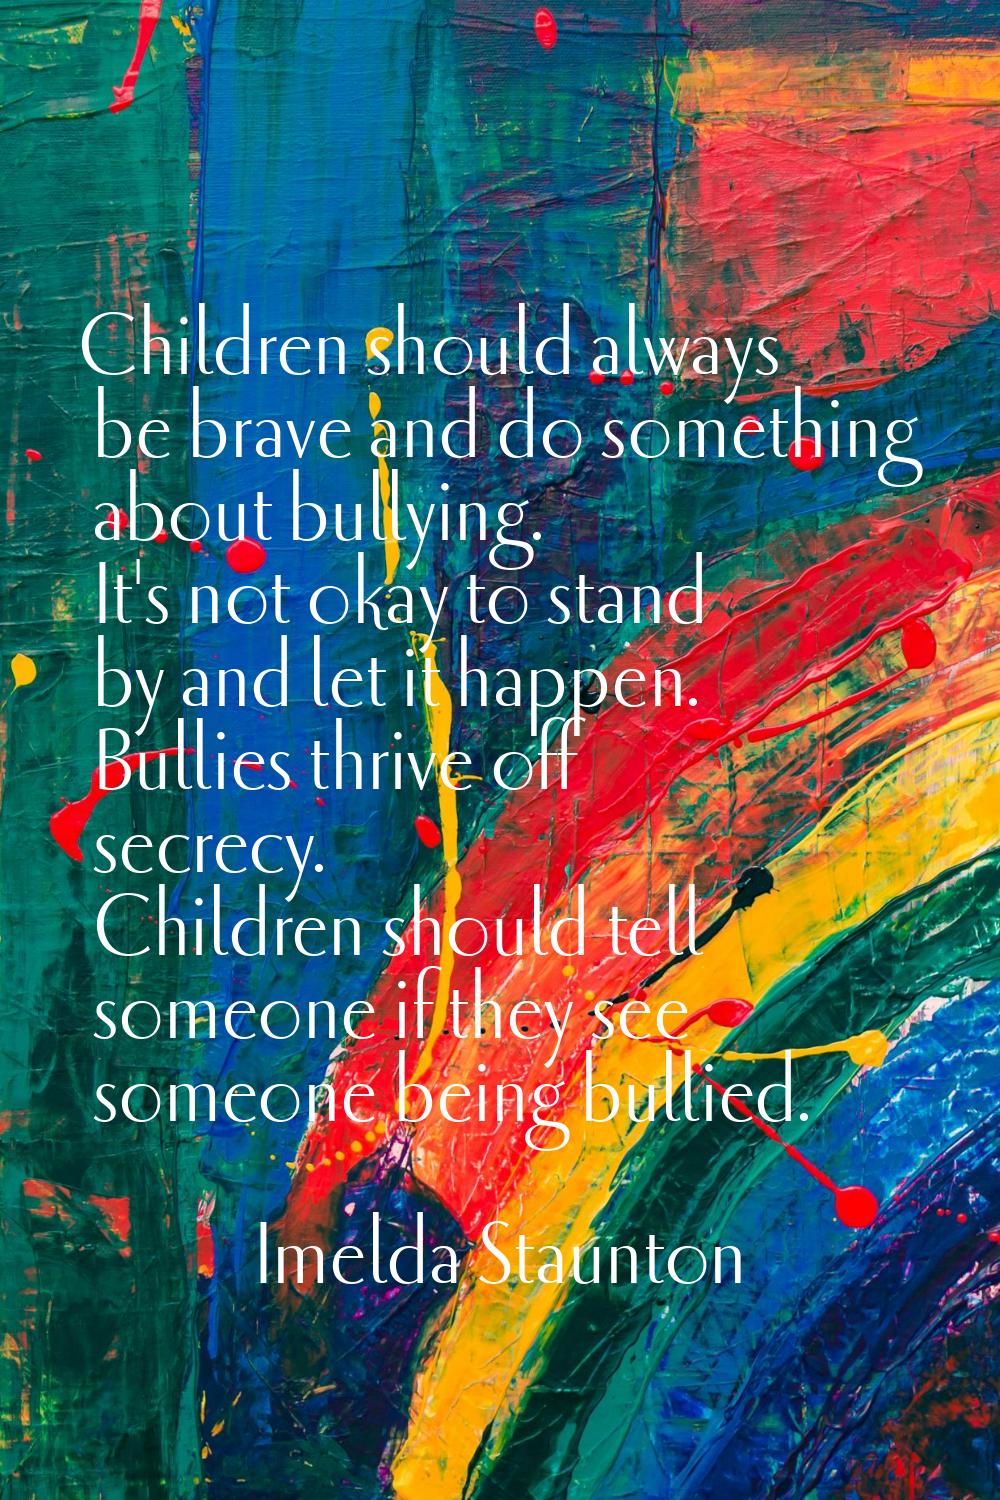 Children should always be brave and do something about bullying. It's not okay to stand by and let 